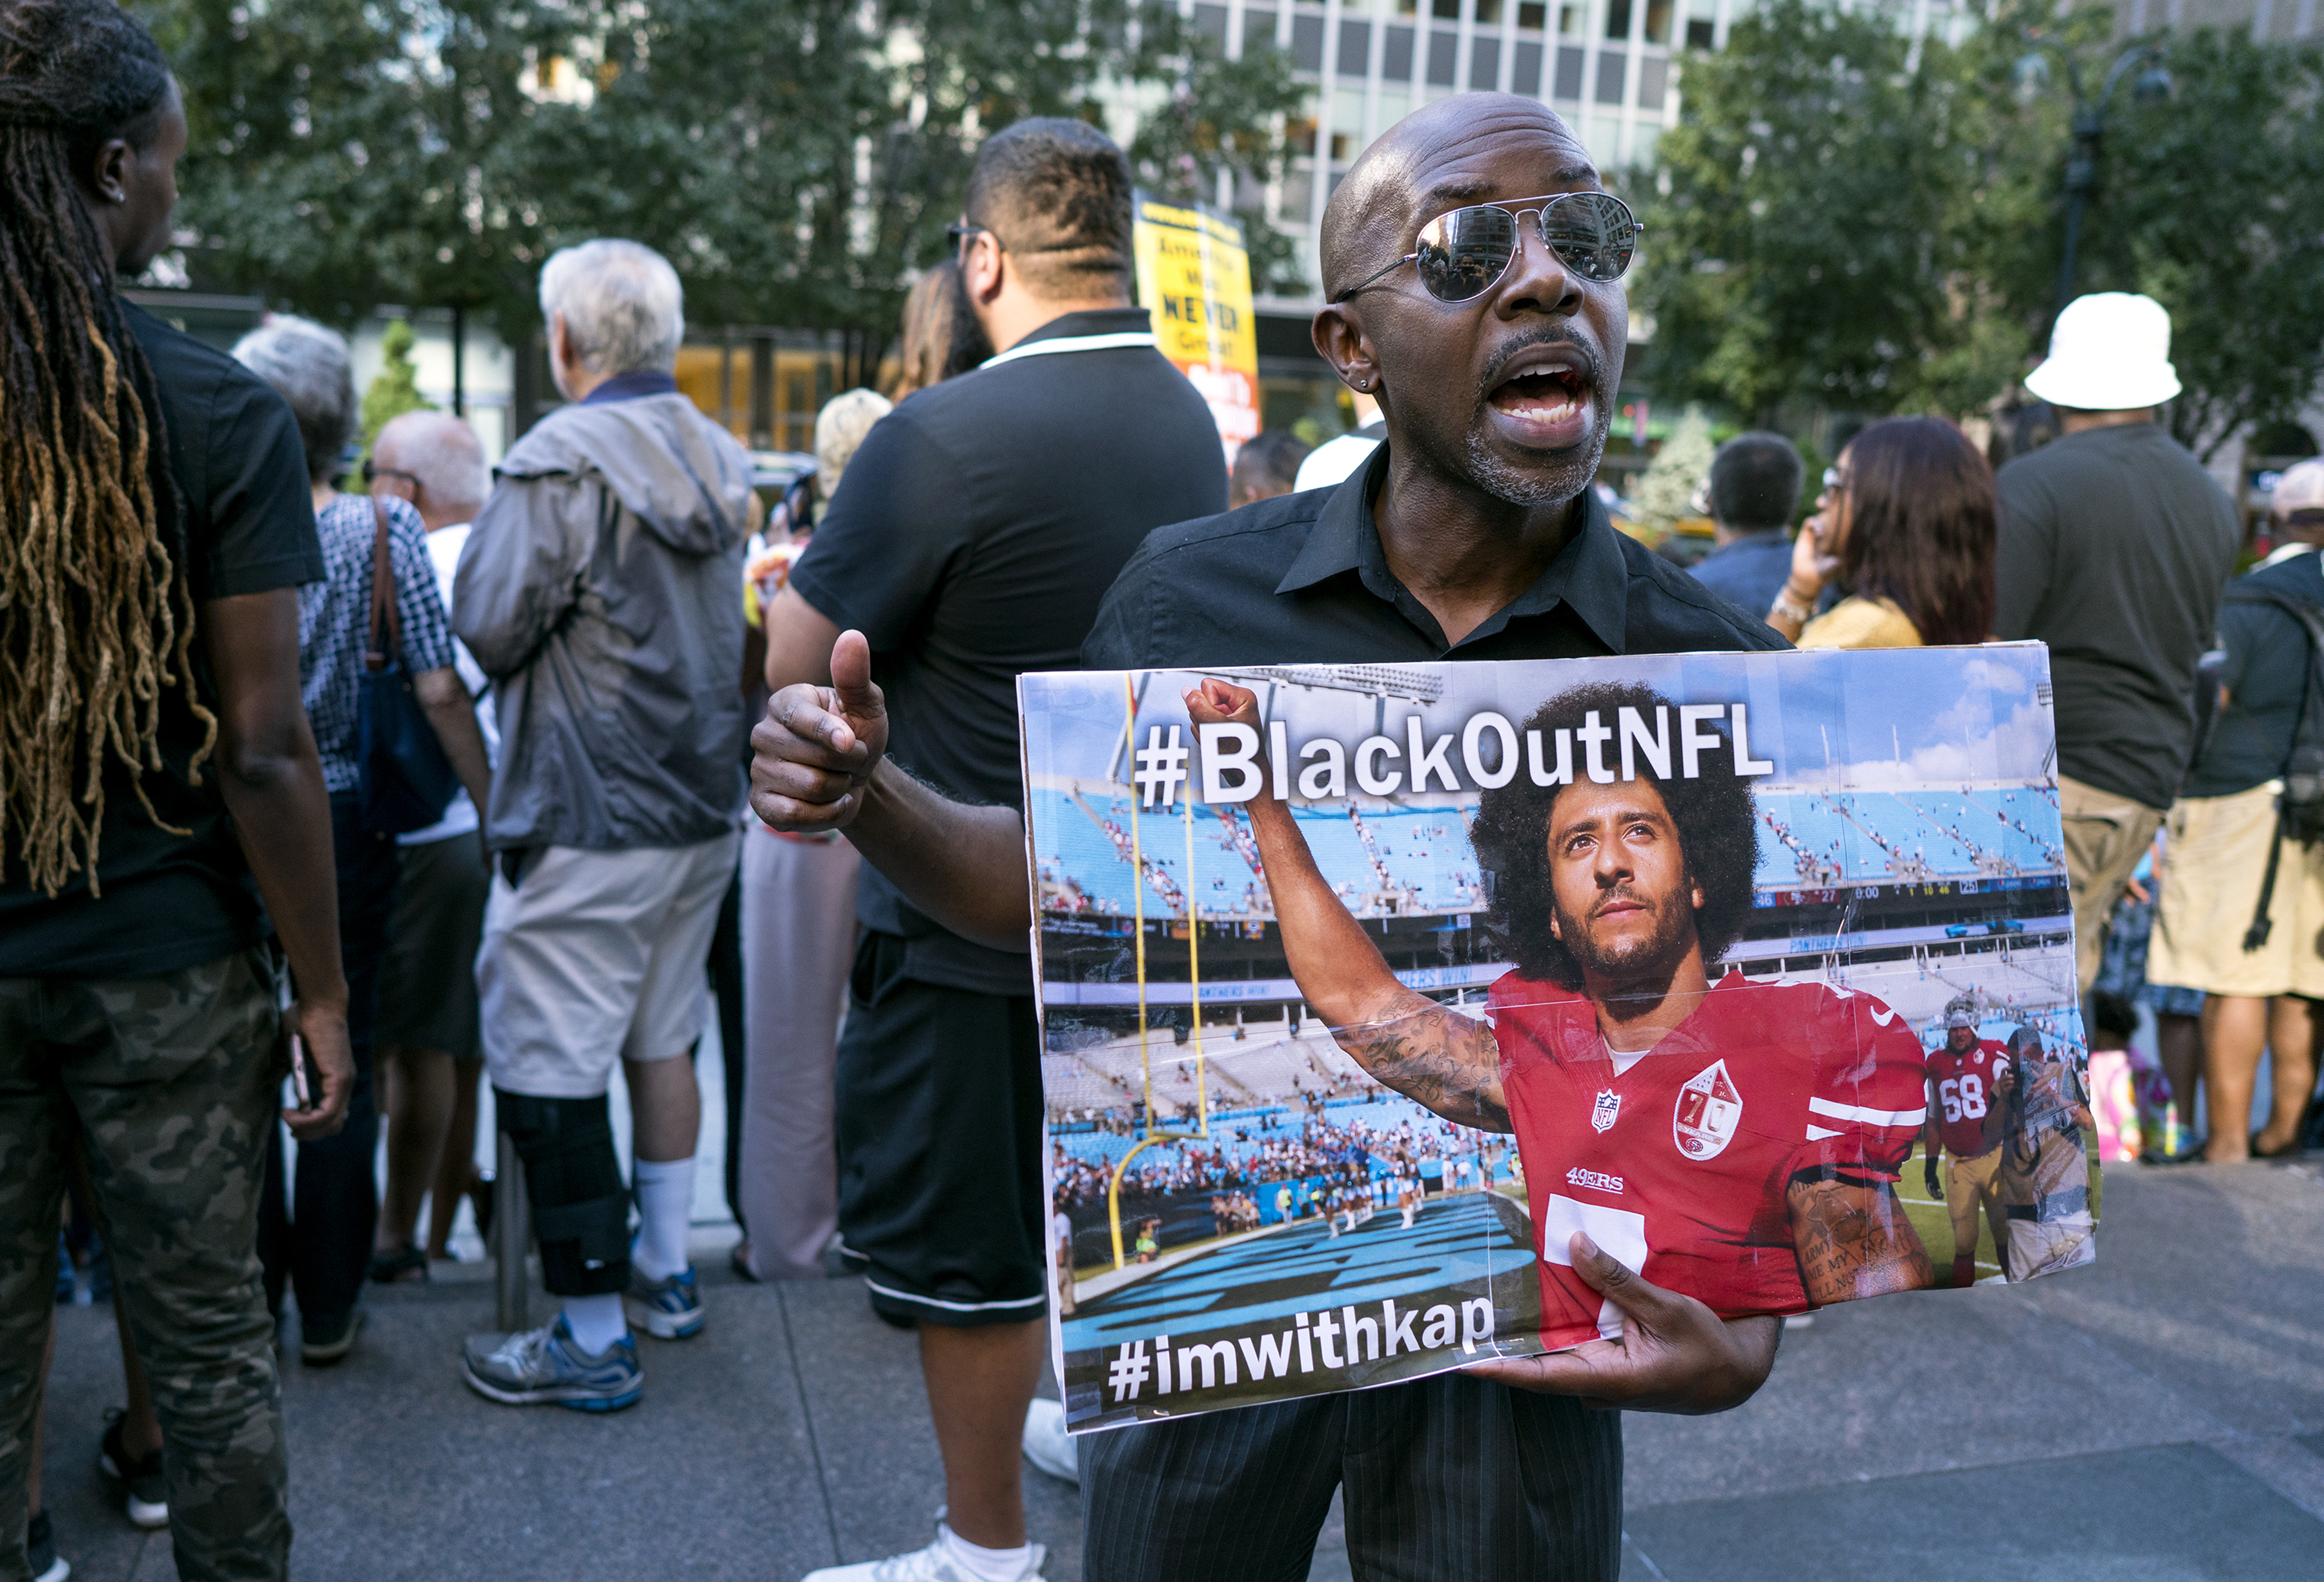 Eric Hamilton joins others gathered in support of unsigned NFL quarterback Colin Kaepernick in August 2017 in front of NFL headquarters in New York. Player protests and Kaepernick’s exile from the NFL received a breadth of media coverage from old and new sports media alike 